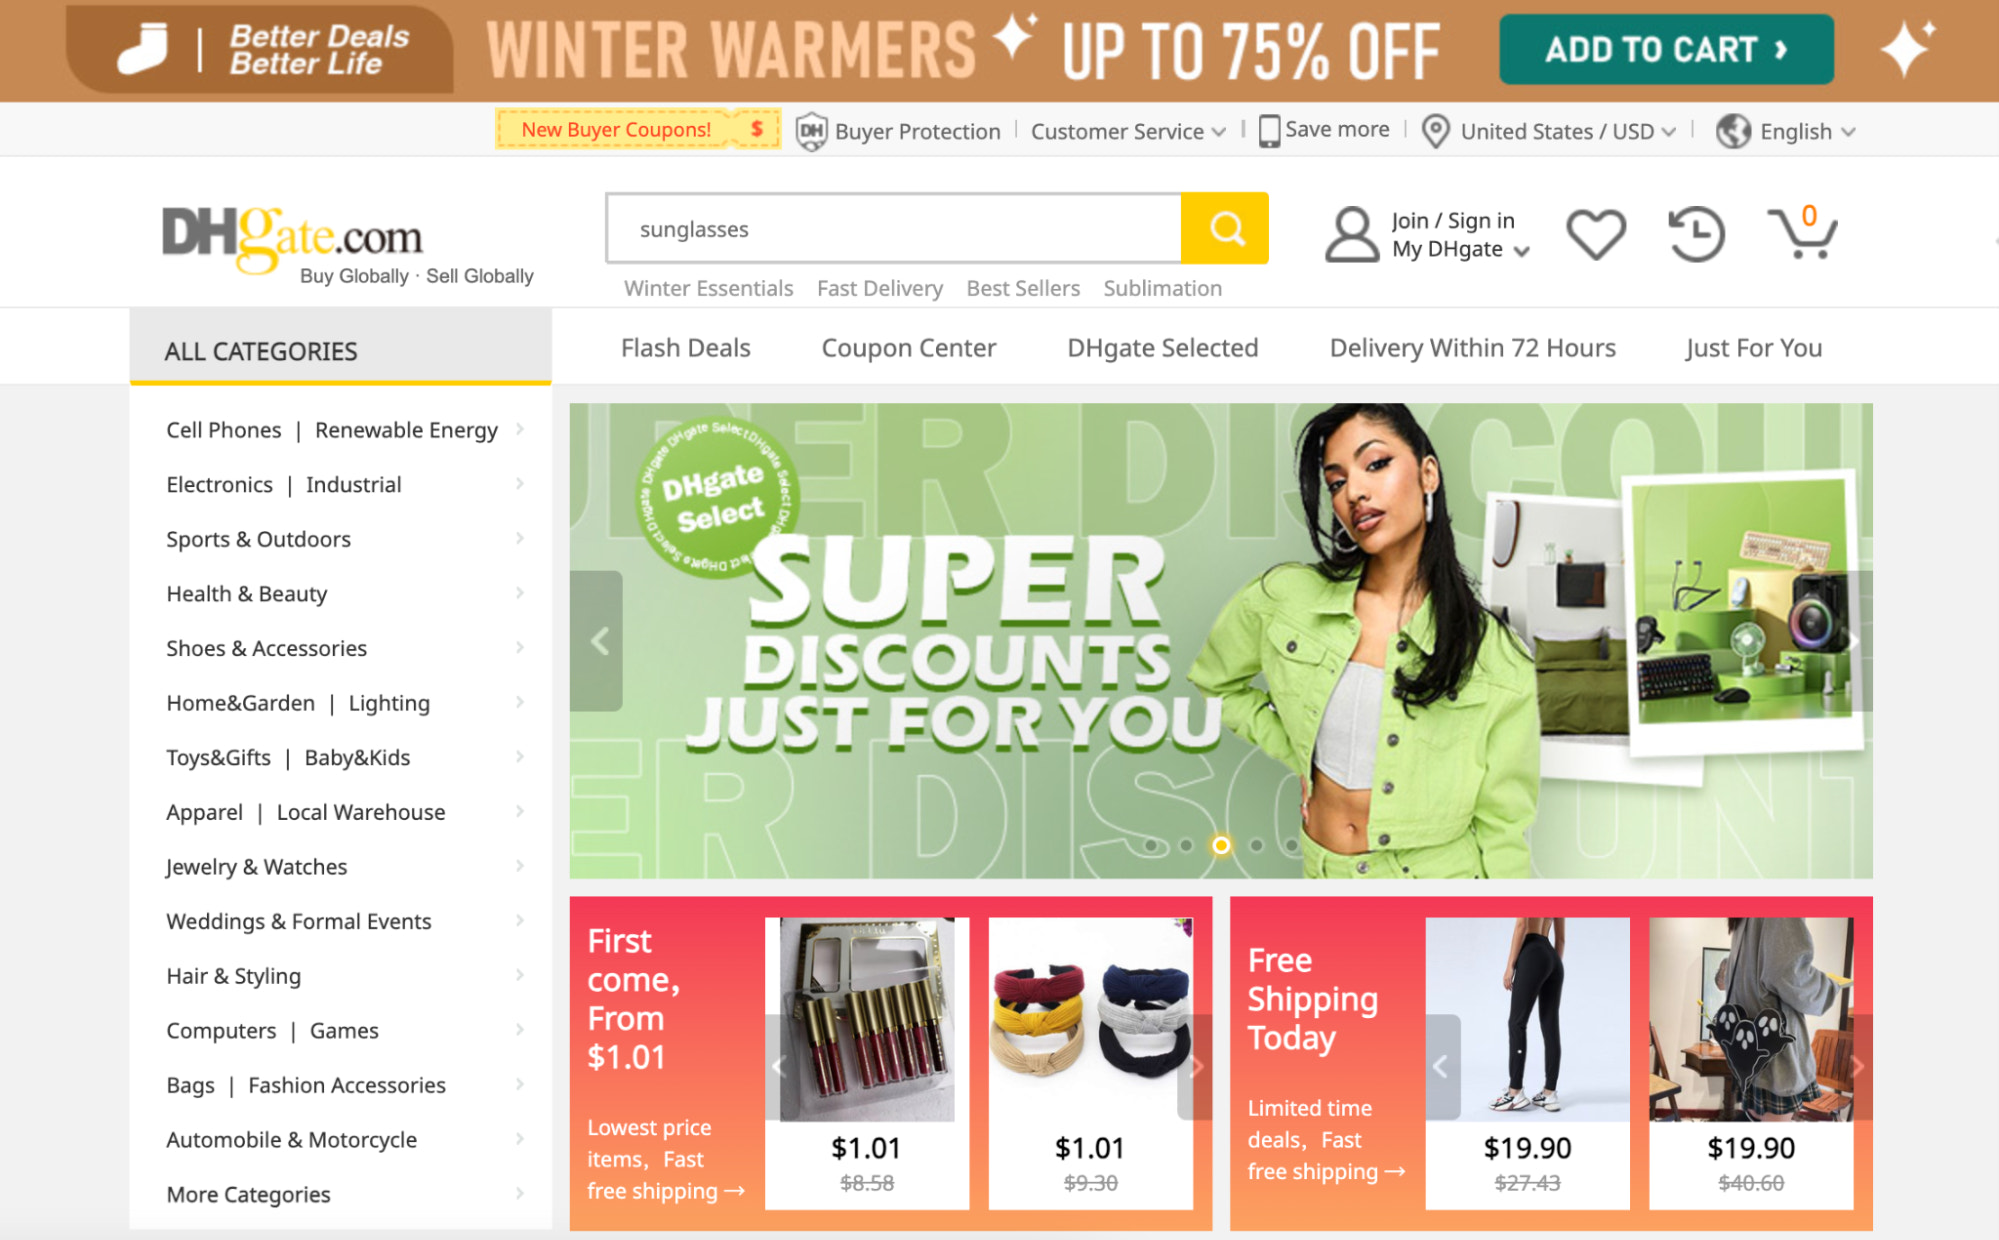 Image of DHGate wholesale supplier website promoting discounts